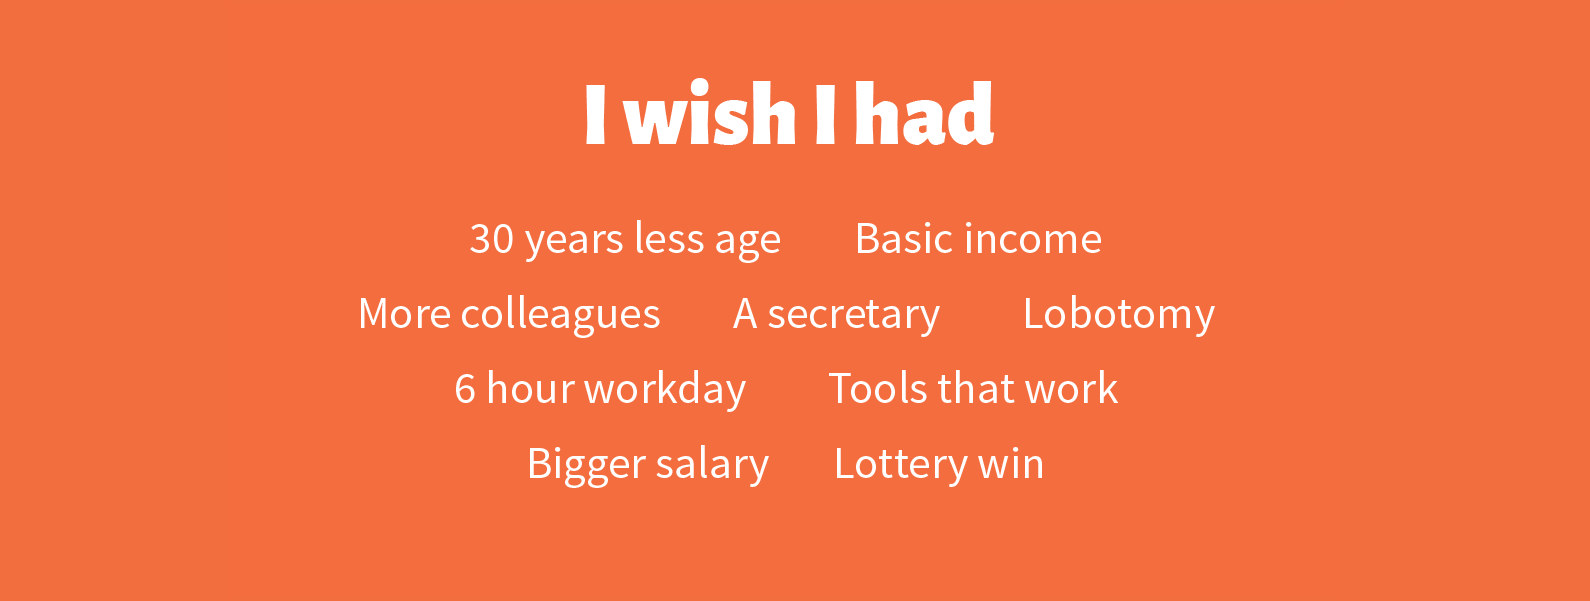 Thereäs text that says: I wish I had 30 years less age, basic income, more colleagues, a secretary, lobotomy, 6 hour workday, tools that work, bigger salary, lottery win